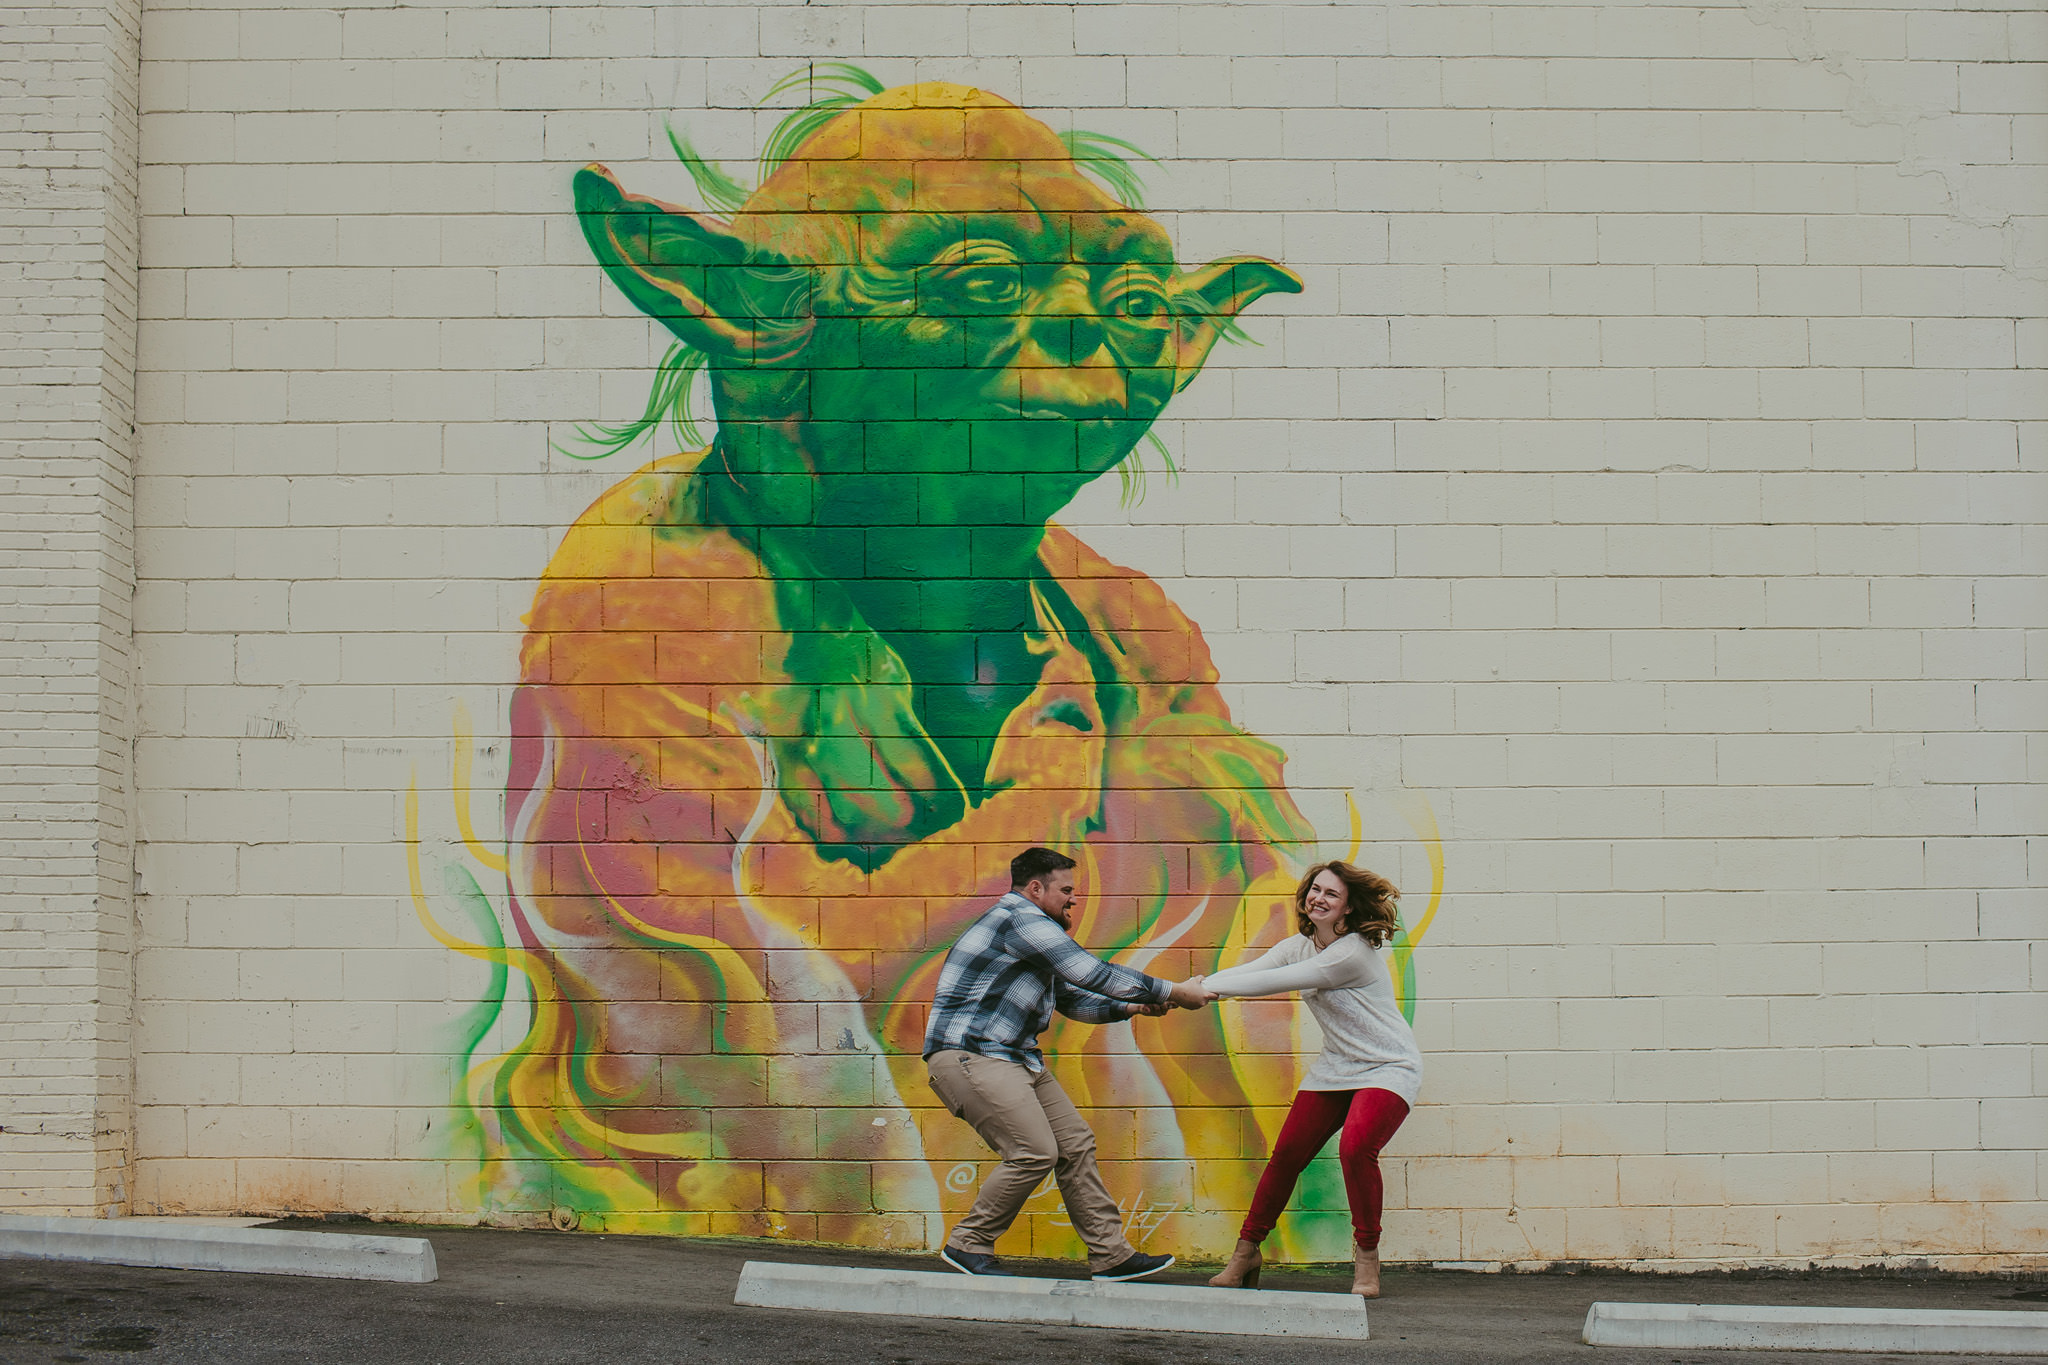 Engagement photos outside of Abari with Yoda mural in Charlotte, NC